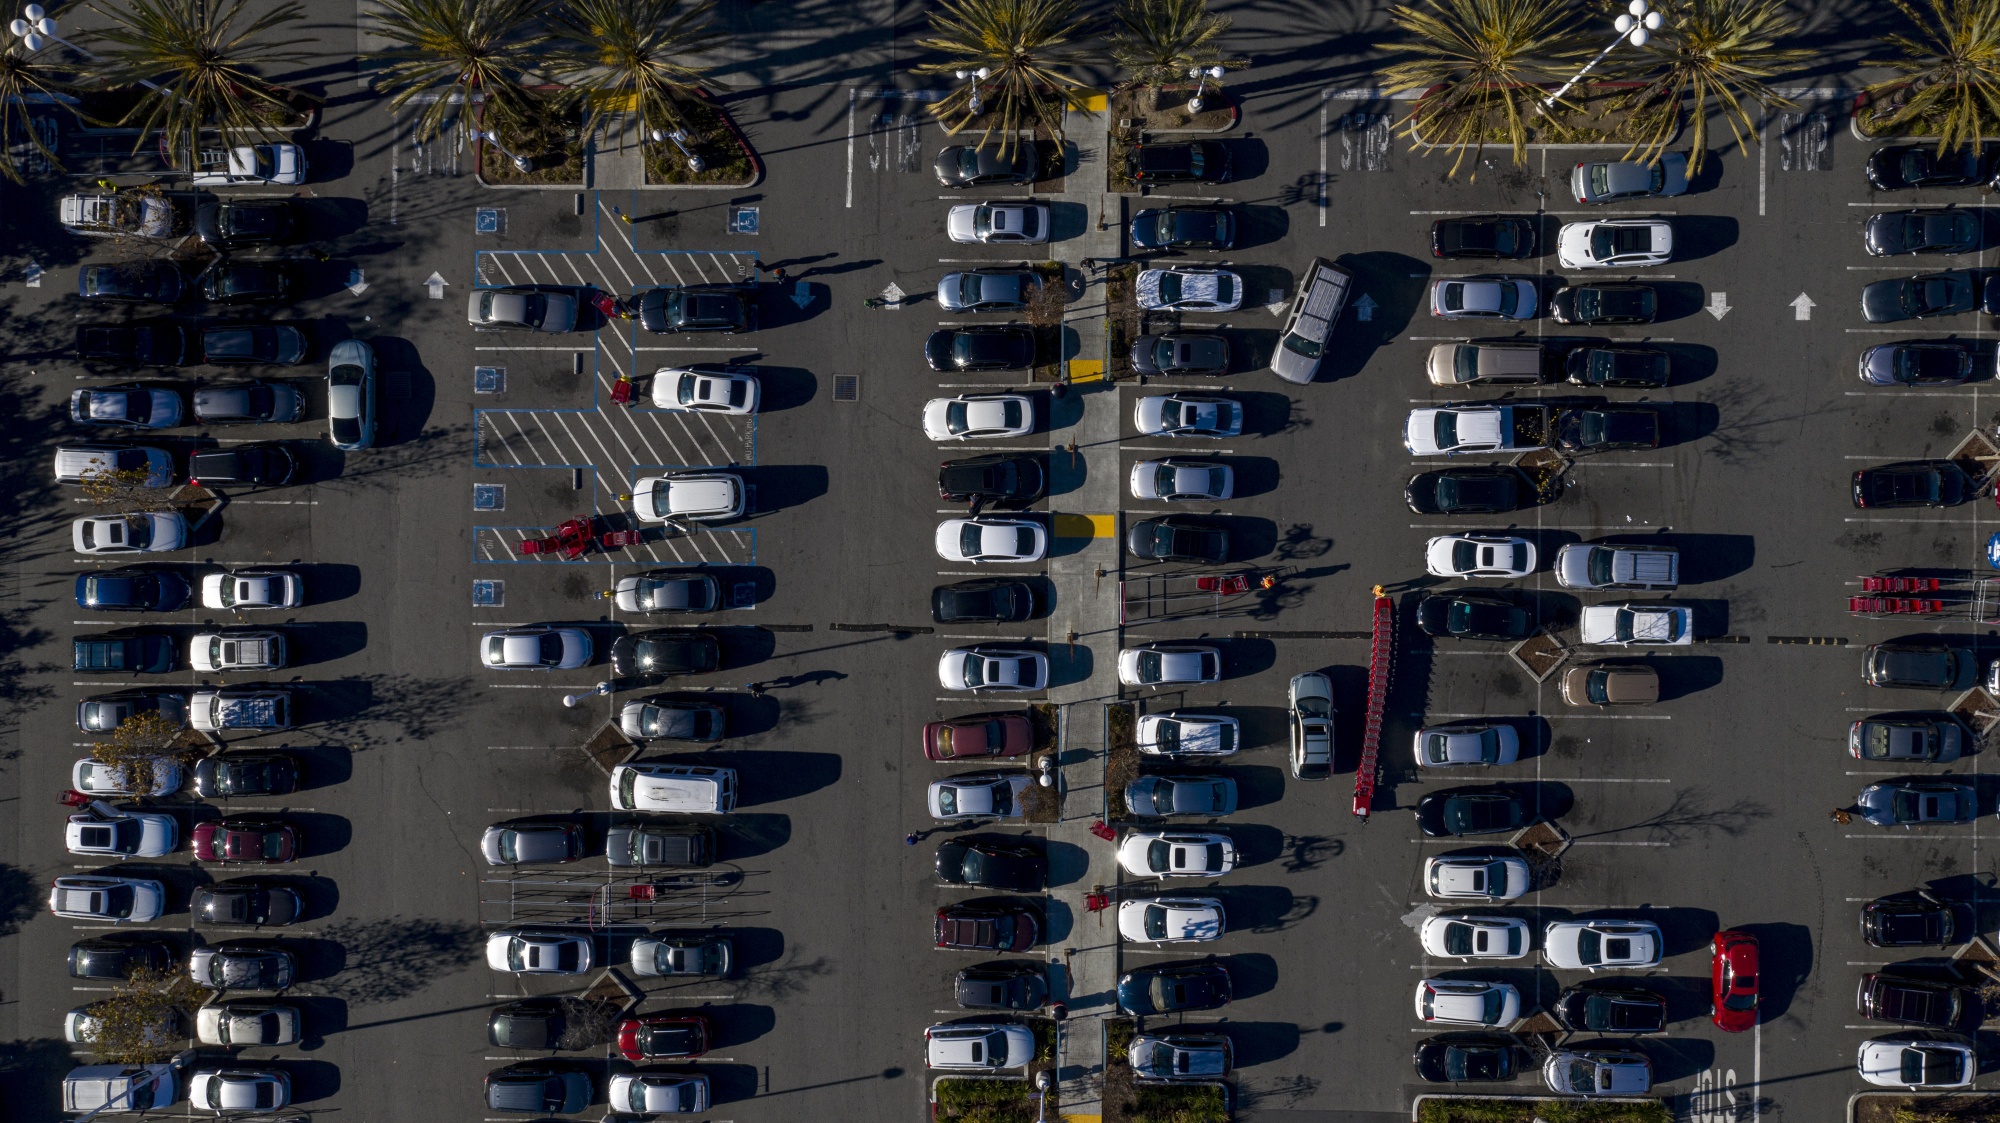 Miami decided parking is more important than housing, dropping